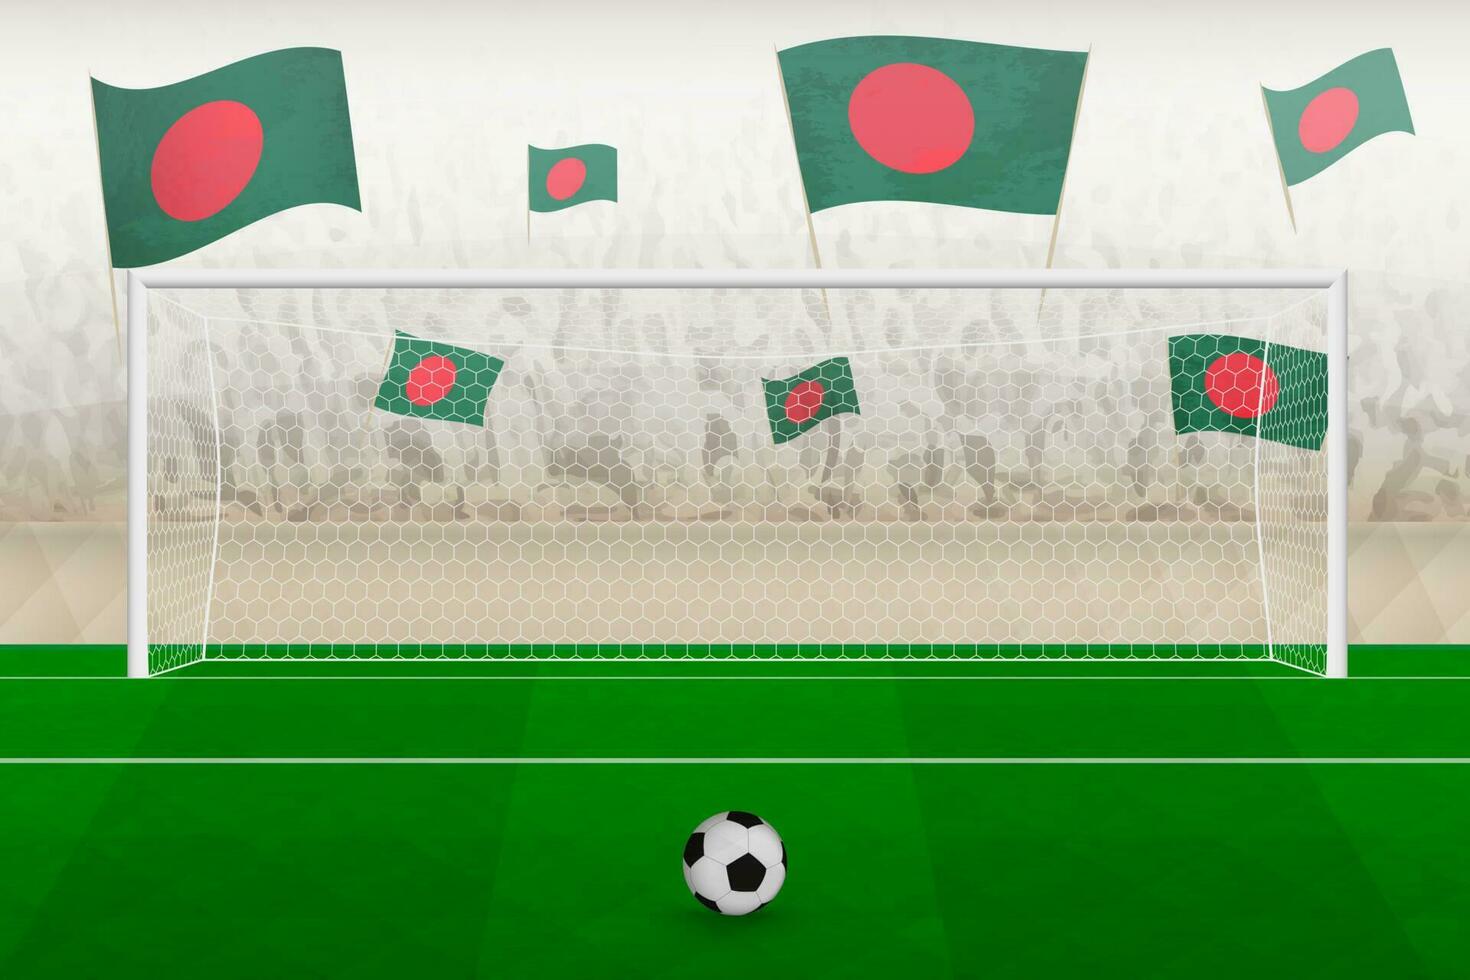 Bangladesh football team fans with flags of Bangladesh cheering on stadium, penalty kick concept in a soccer match. vector